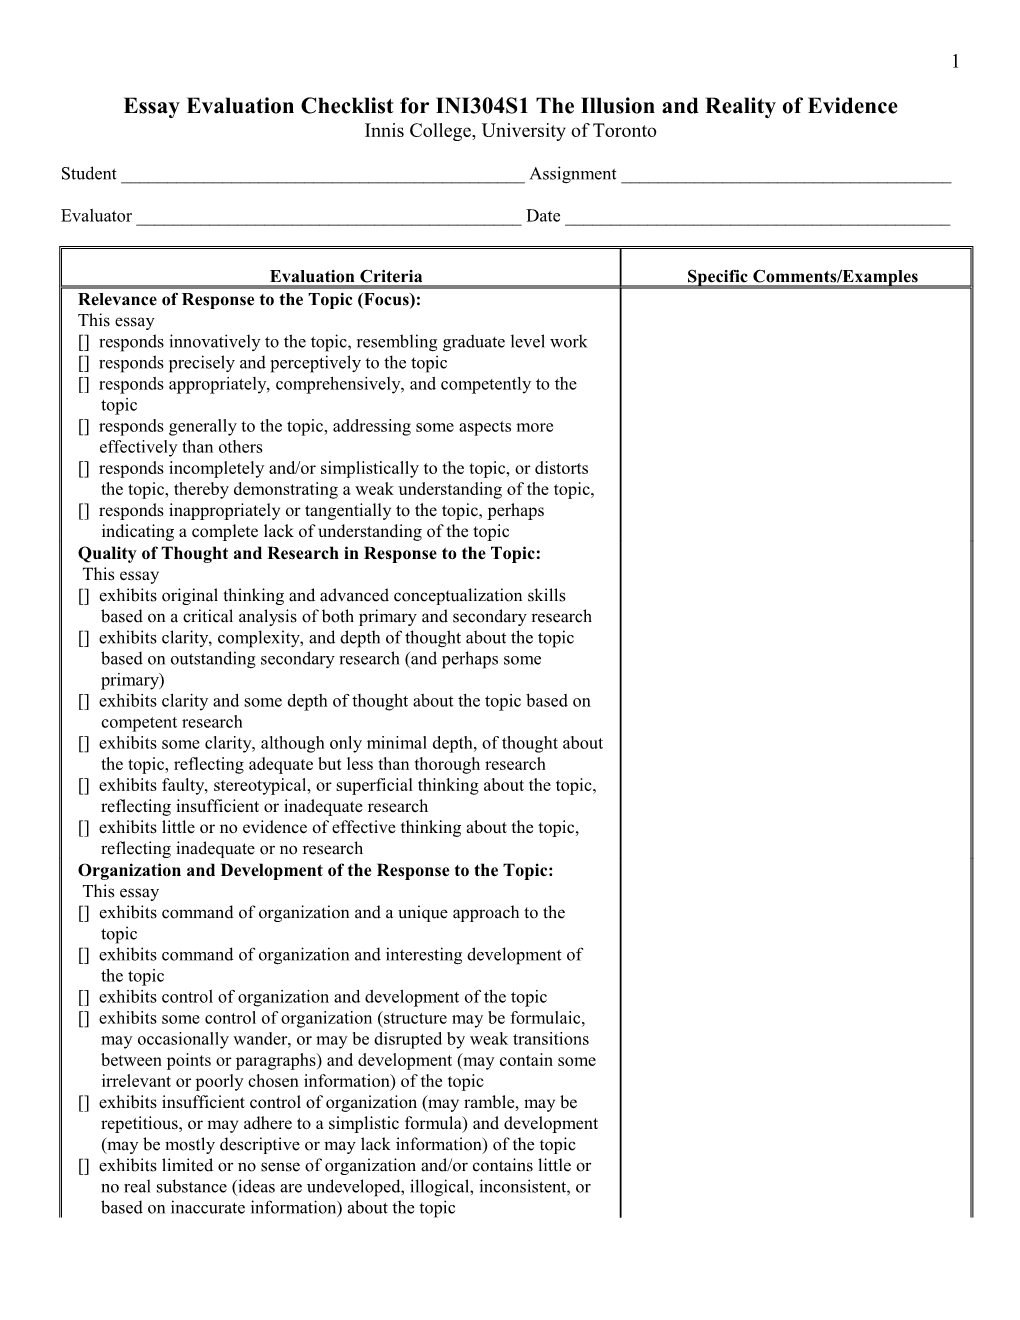 Essay Evaluation Checklist for INI304S1 the Illusion and Reality of Evidence